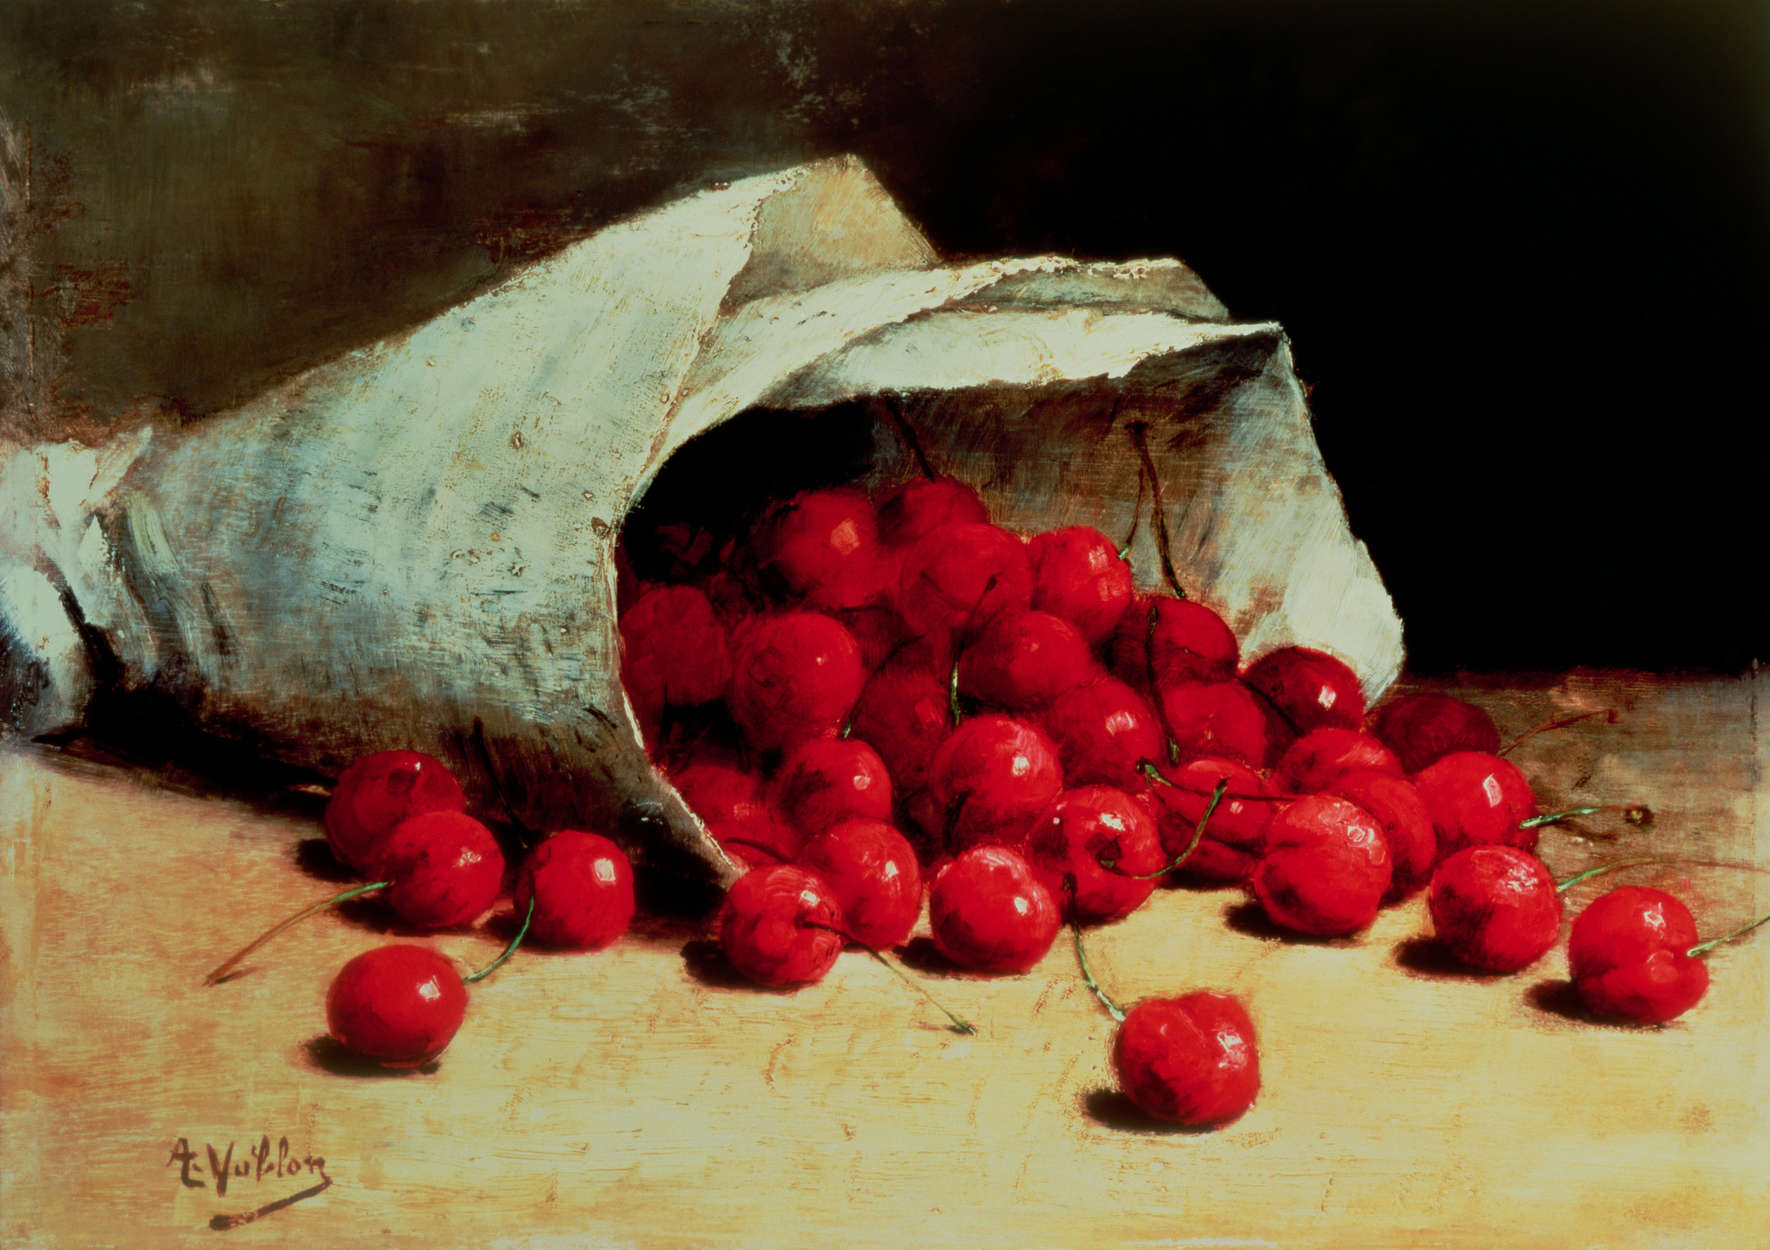             Photo wallpaper "A spilled bag of cherries" by Antoine Vollon
        